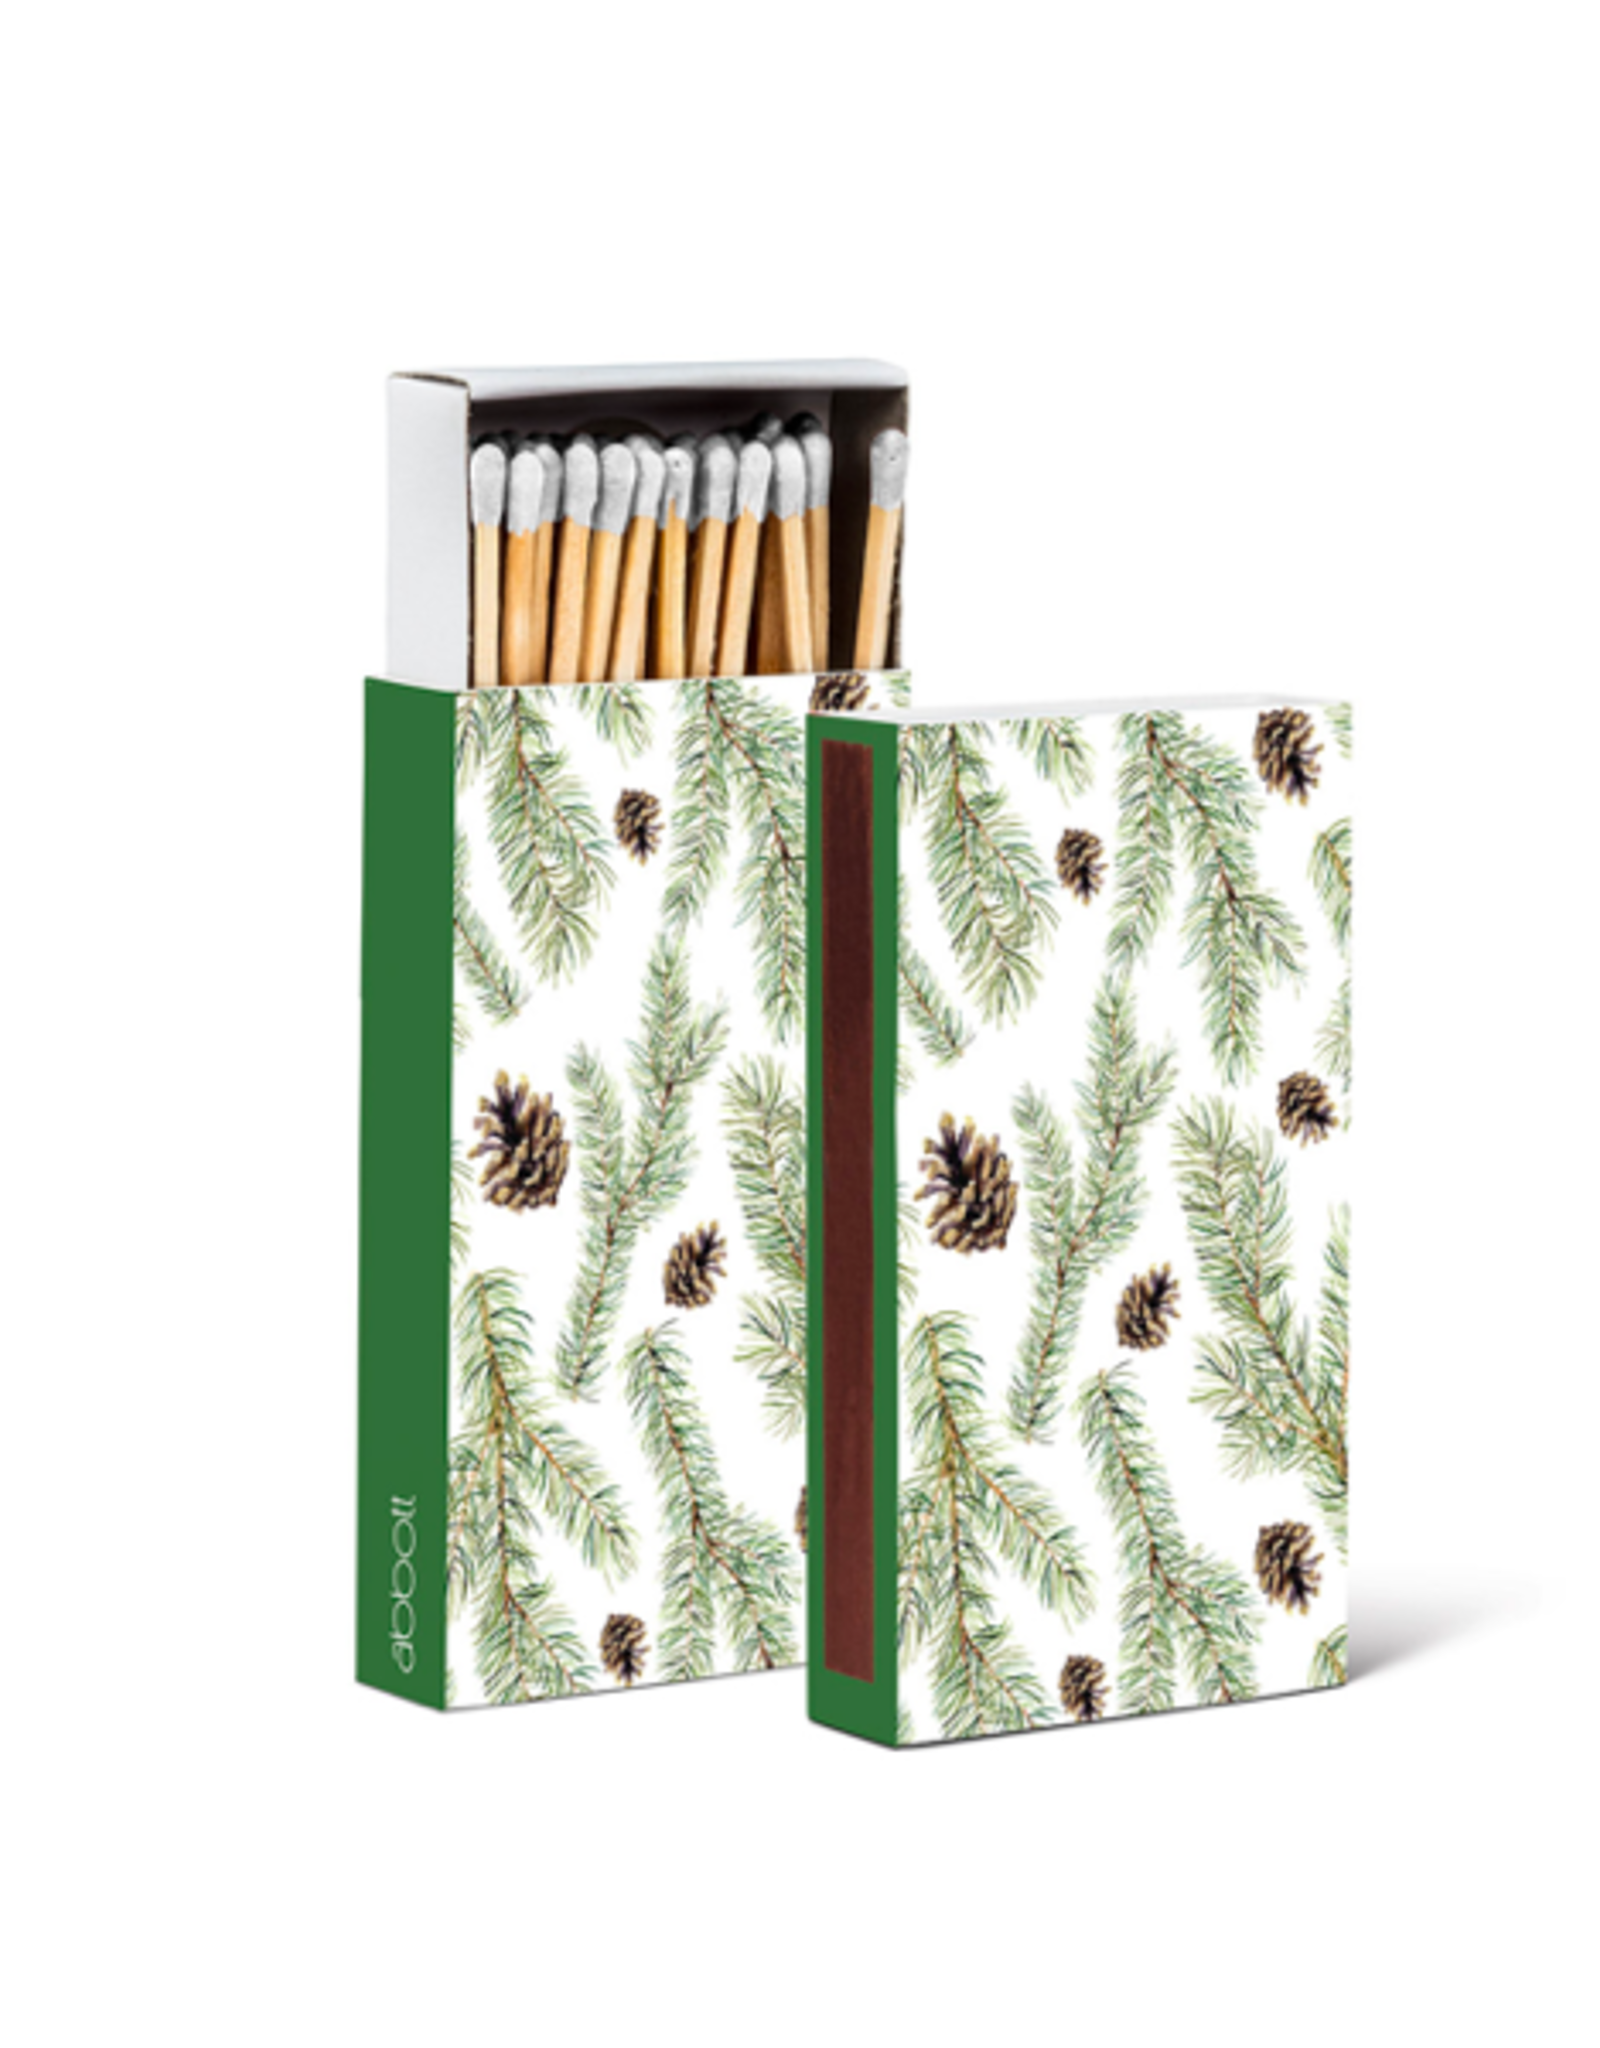 ATT - Boxed Matches / Pine Branches, 4"